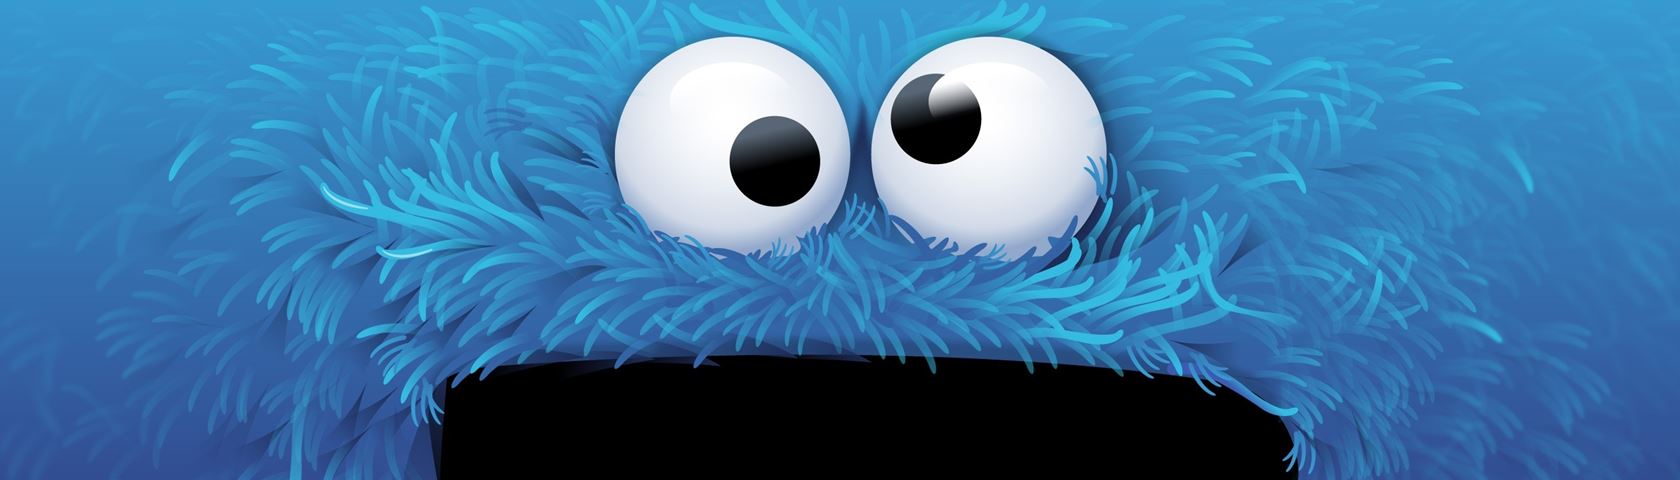 Cookie Monster • Images • WallpaperFusion ...